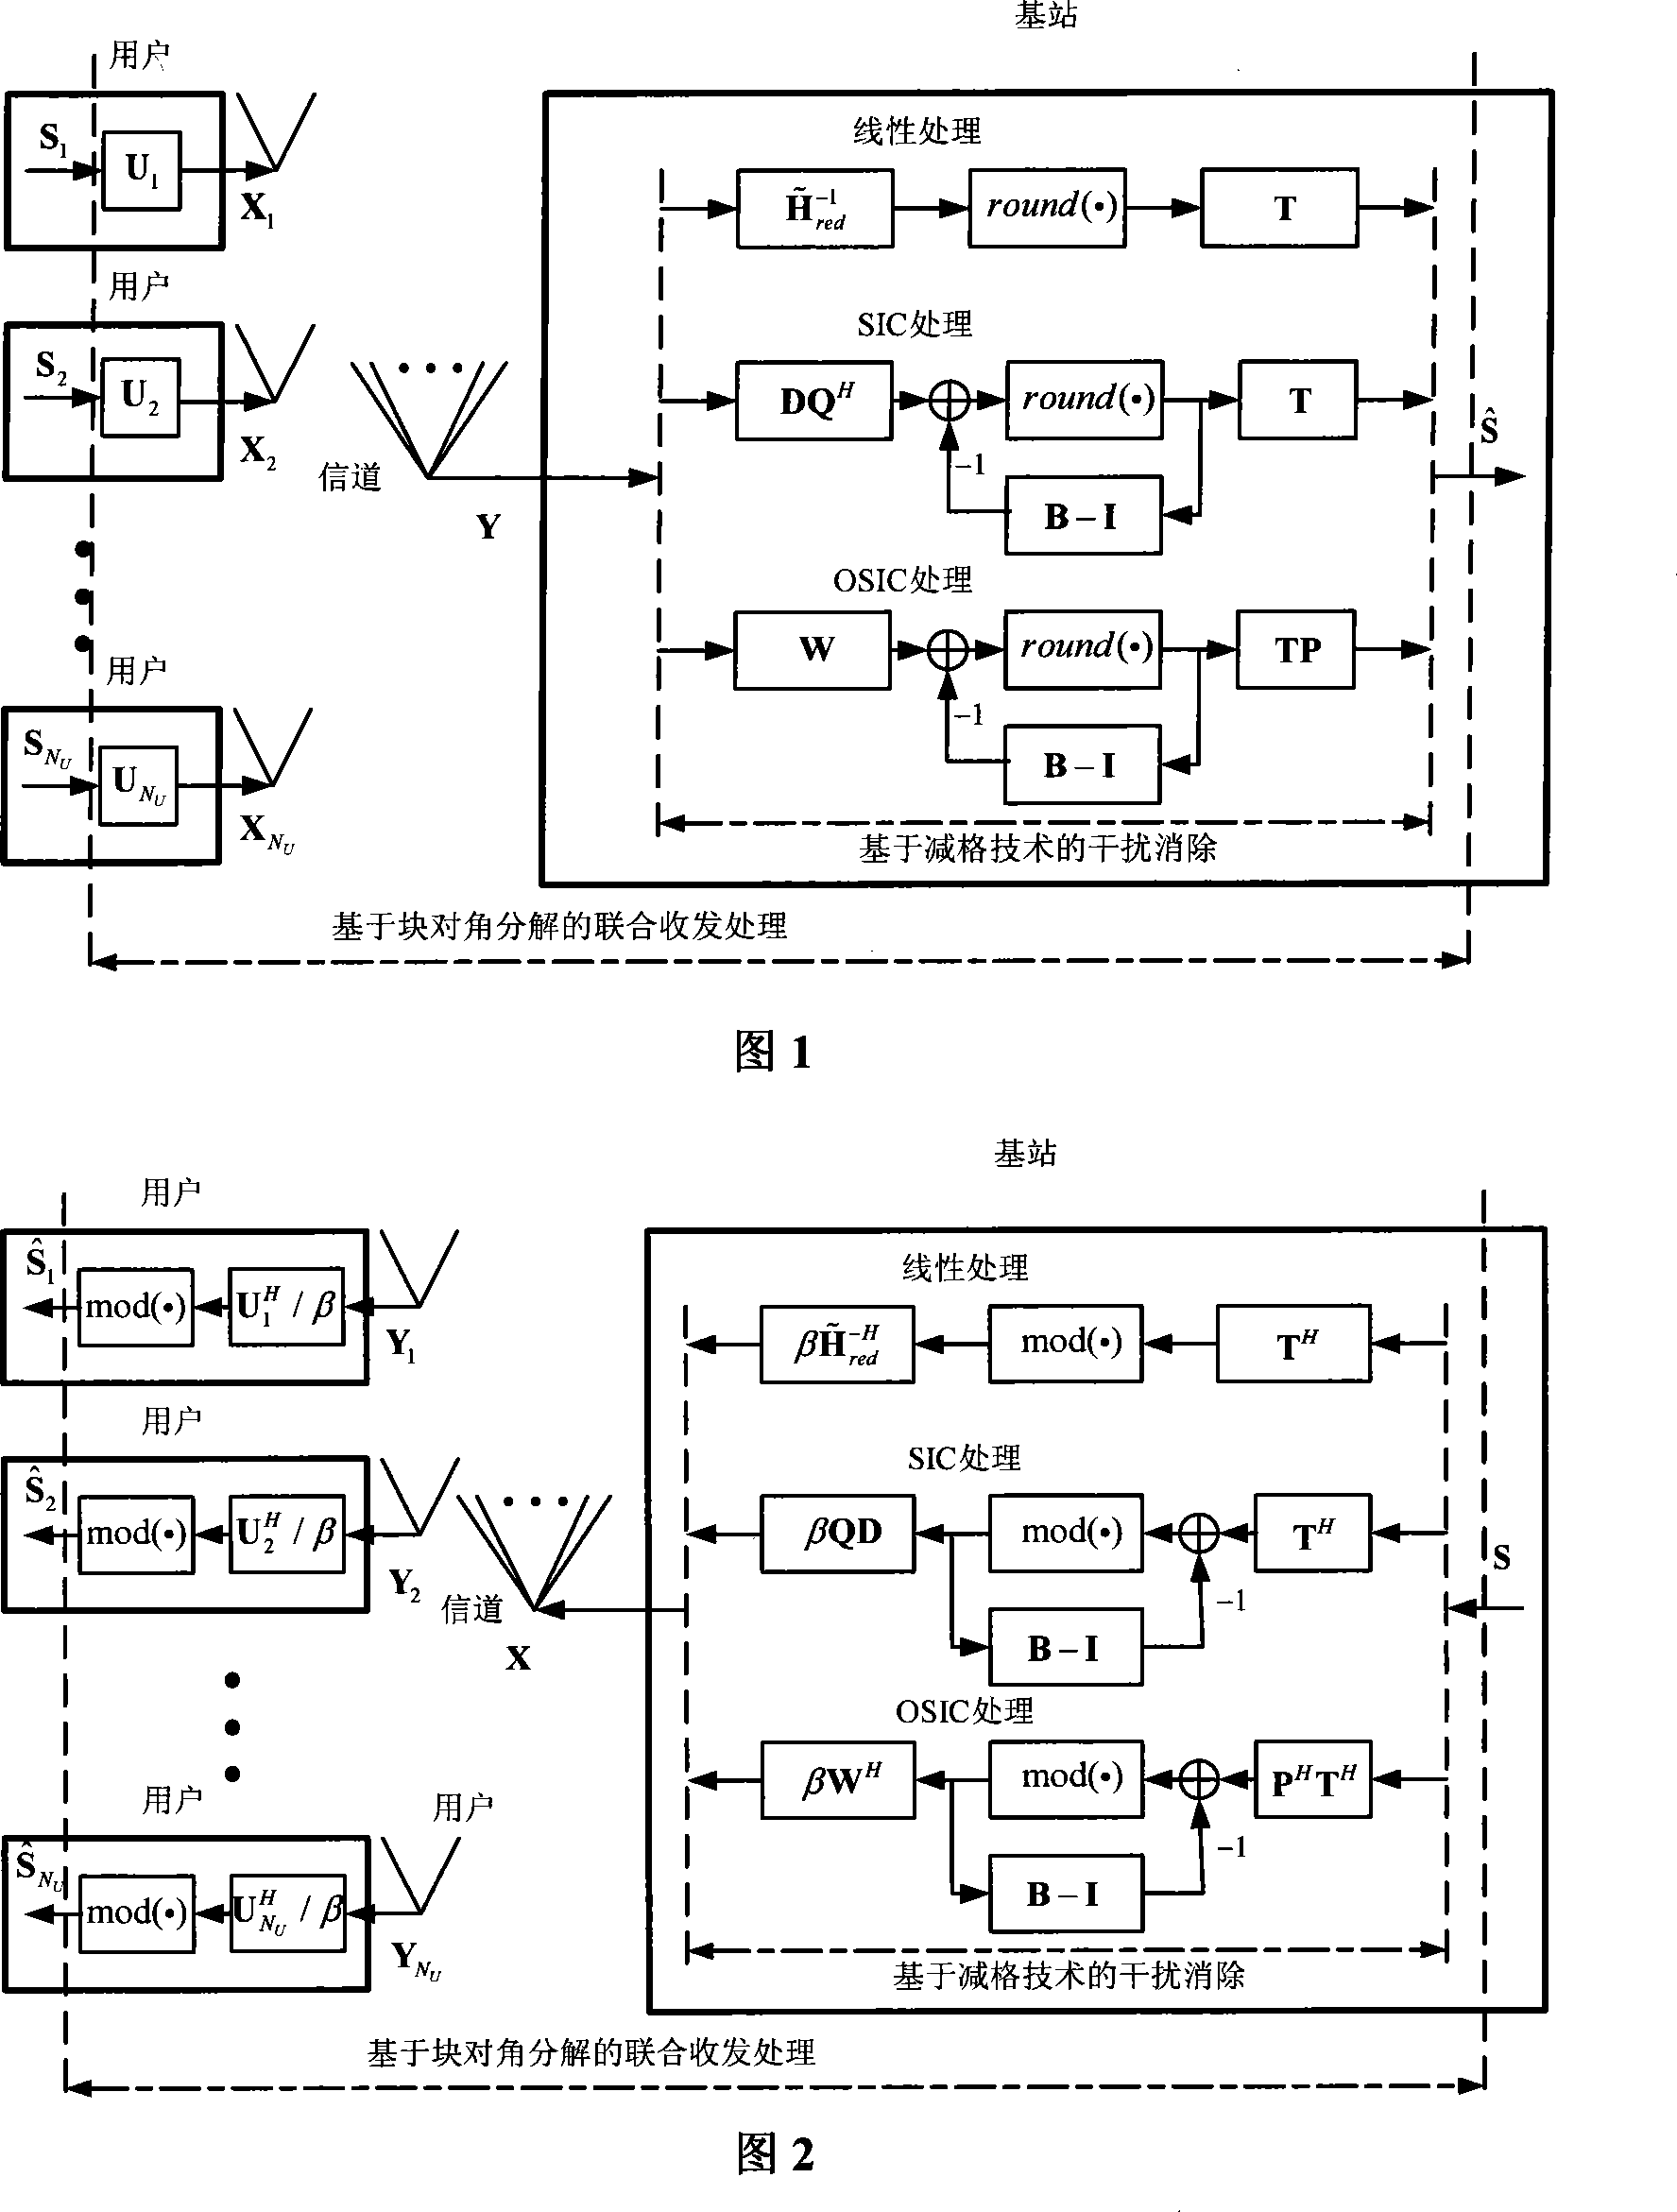 Signal processing method of multi-user multi-aerial communication system transmit-receive combination